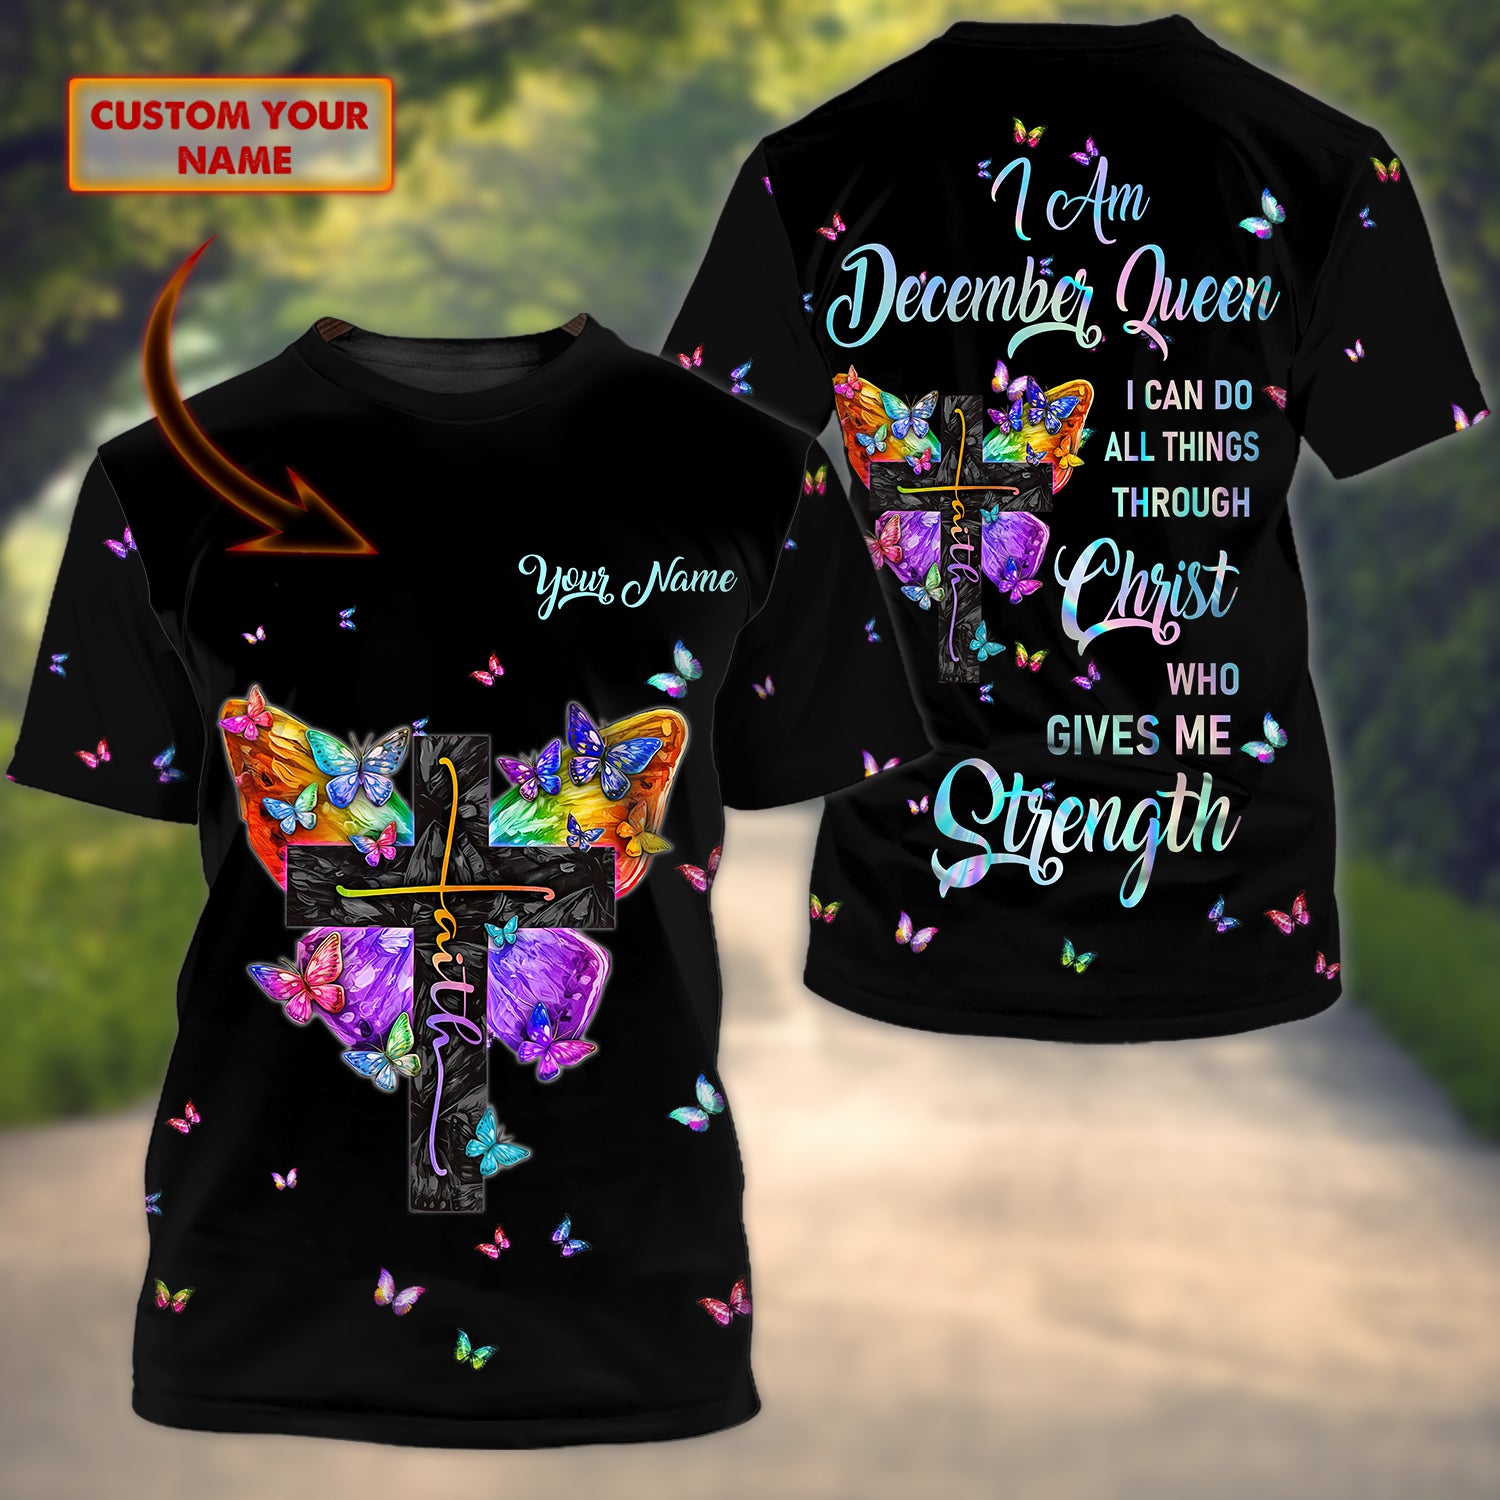 December Queen - Personalized Name 3D Tshirt 57 - Bhn97